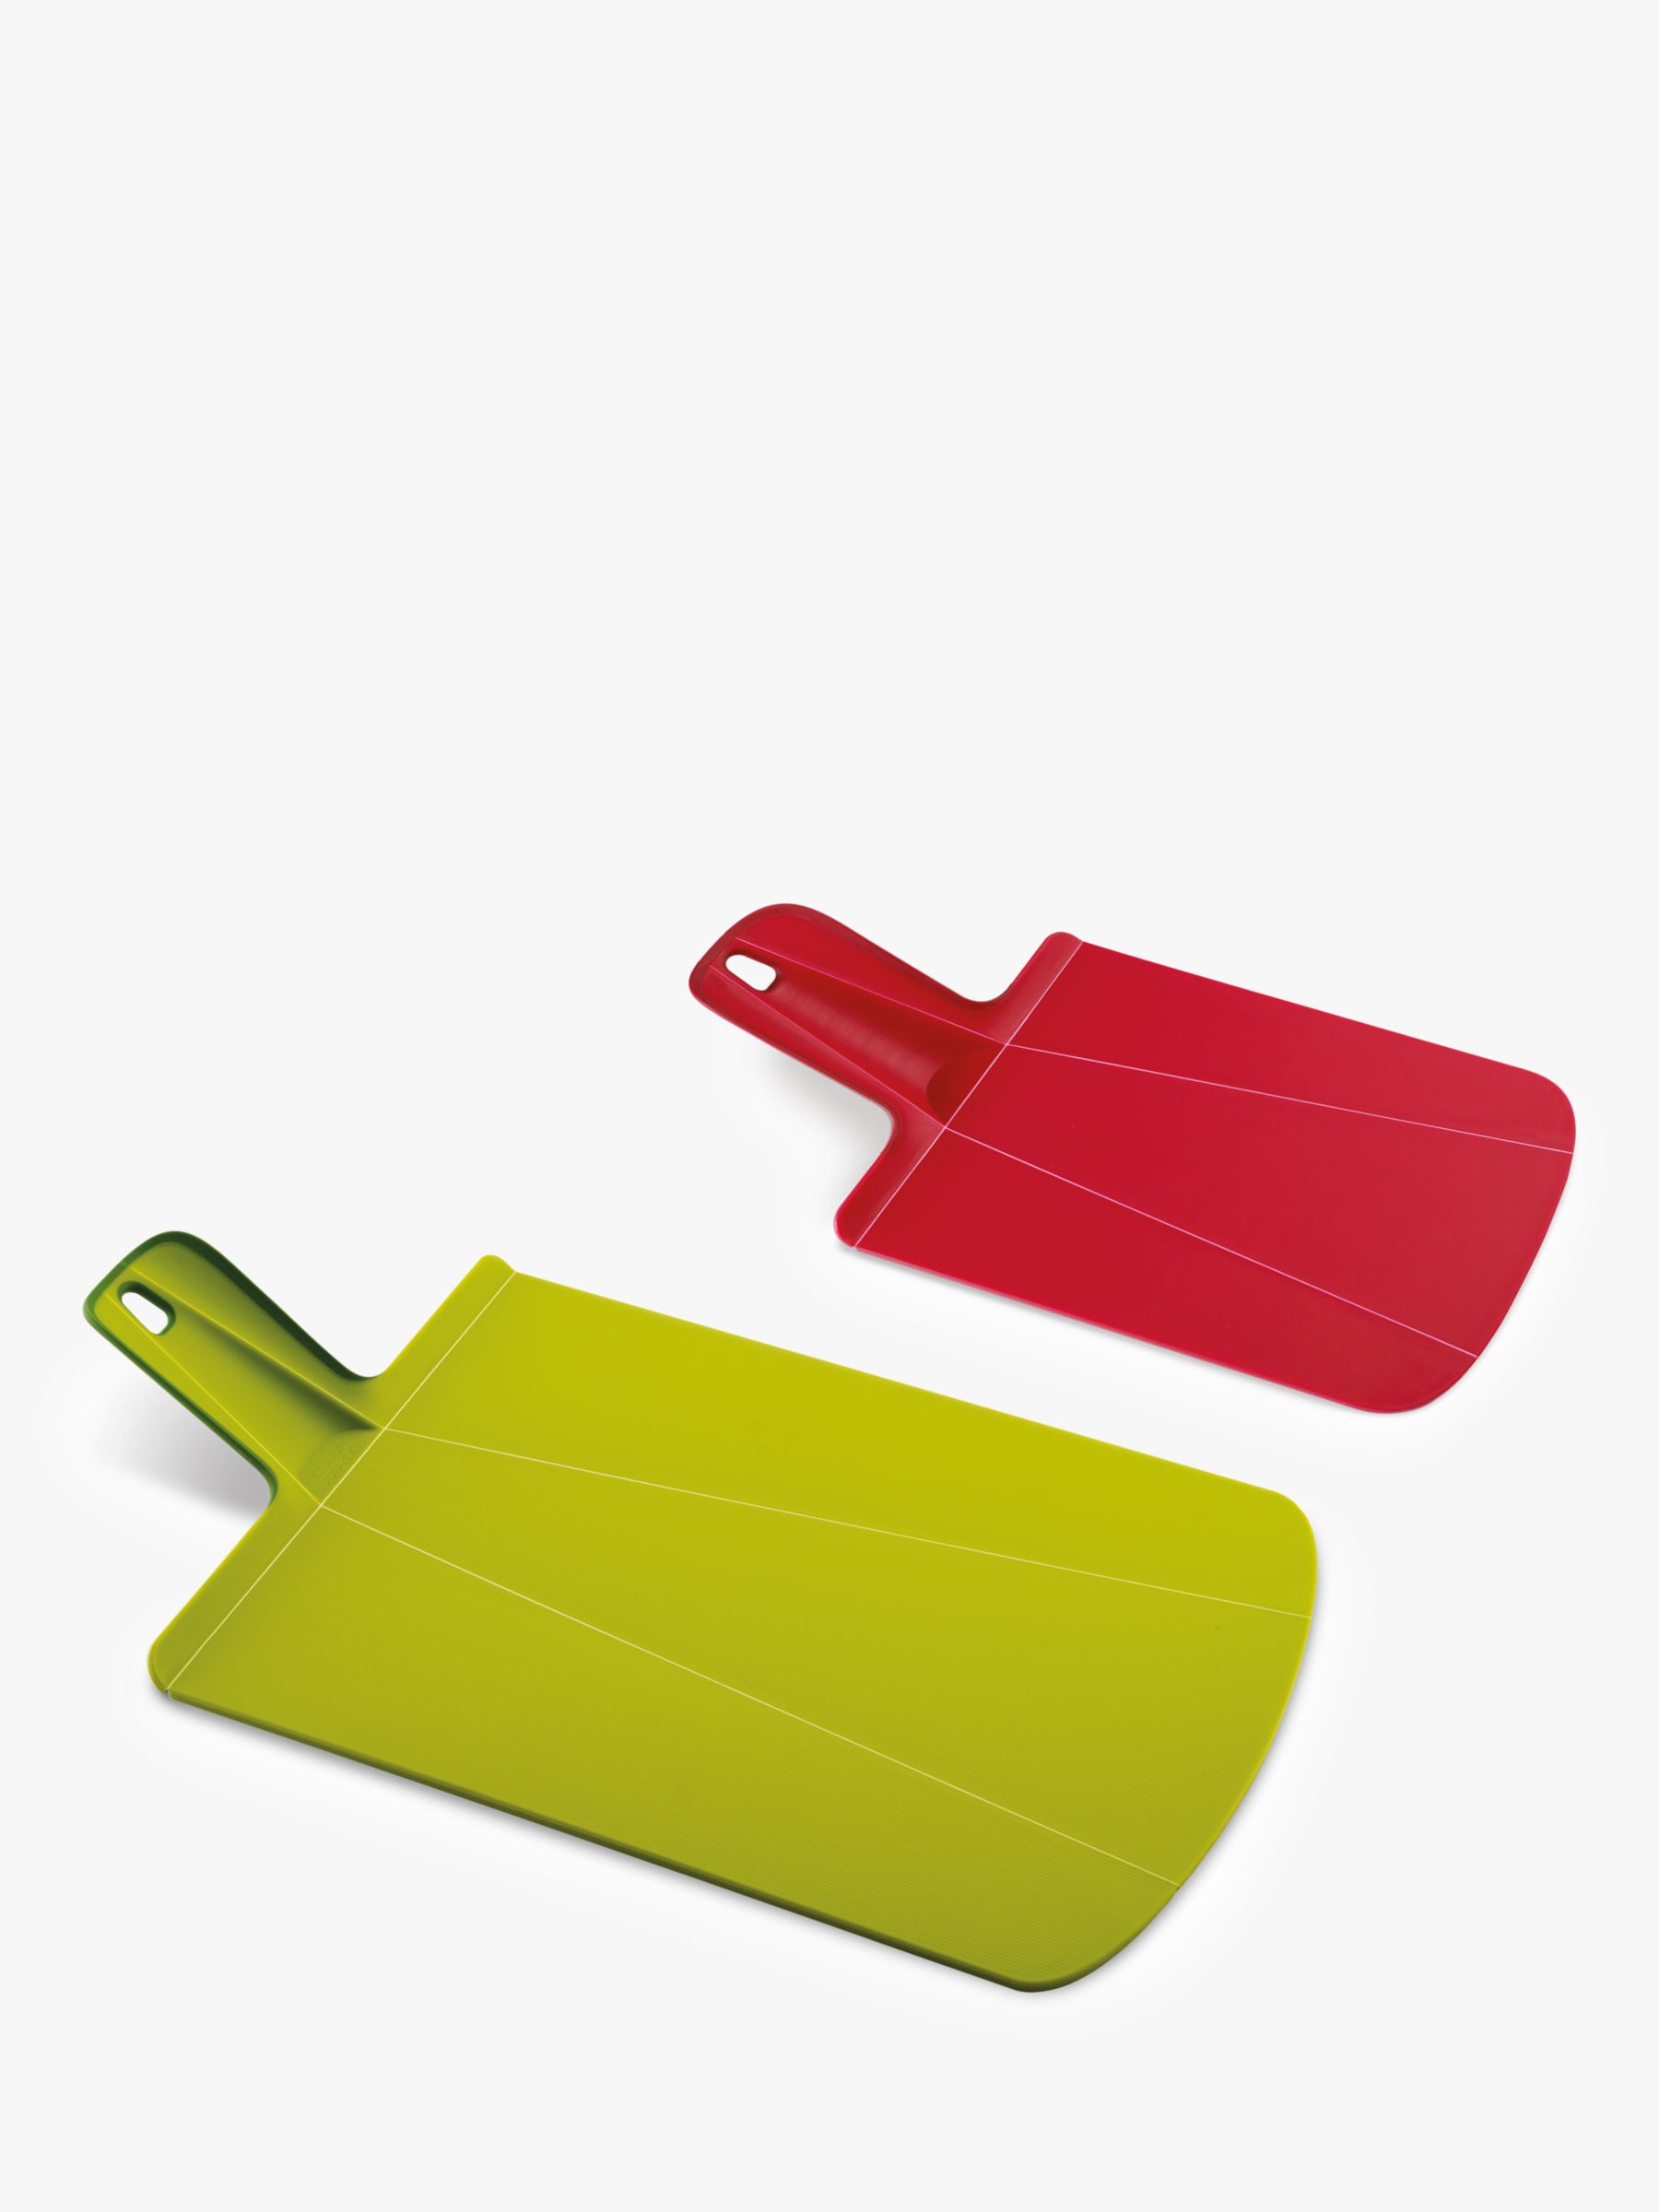 small plastic chopping boards